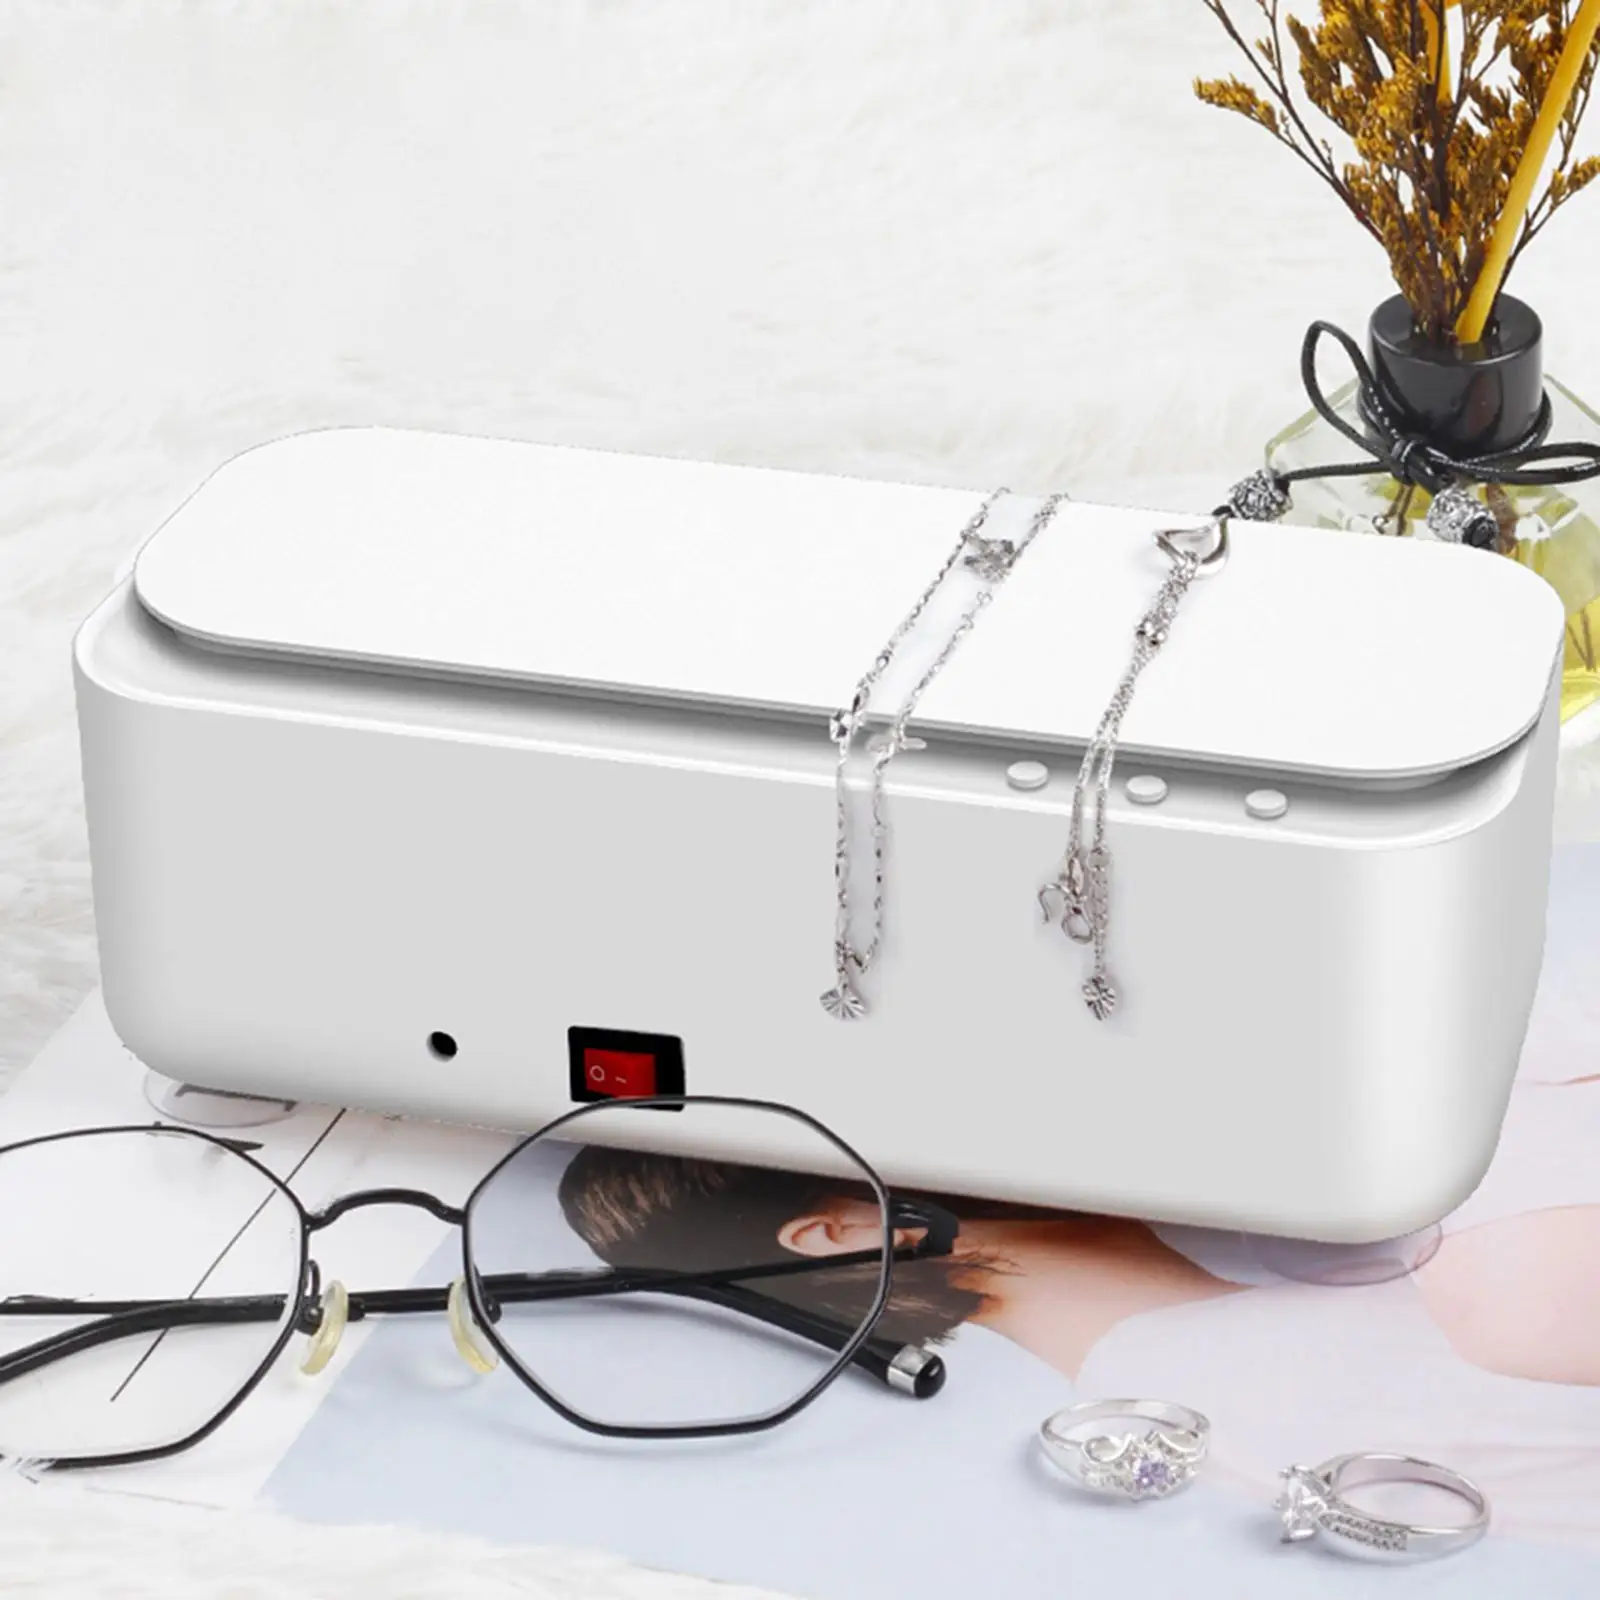 Portable Ultrasonic Cleaner Low Noise Electric Battery Powered Ultrasonic Cleaning Machine for Coin Eyeglasses Necklaces Rings